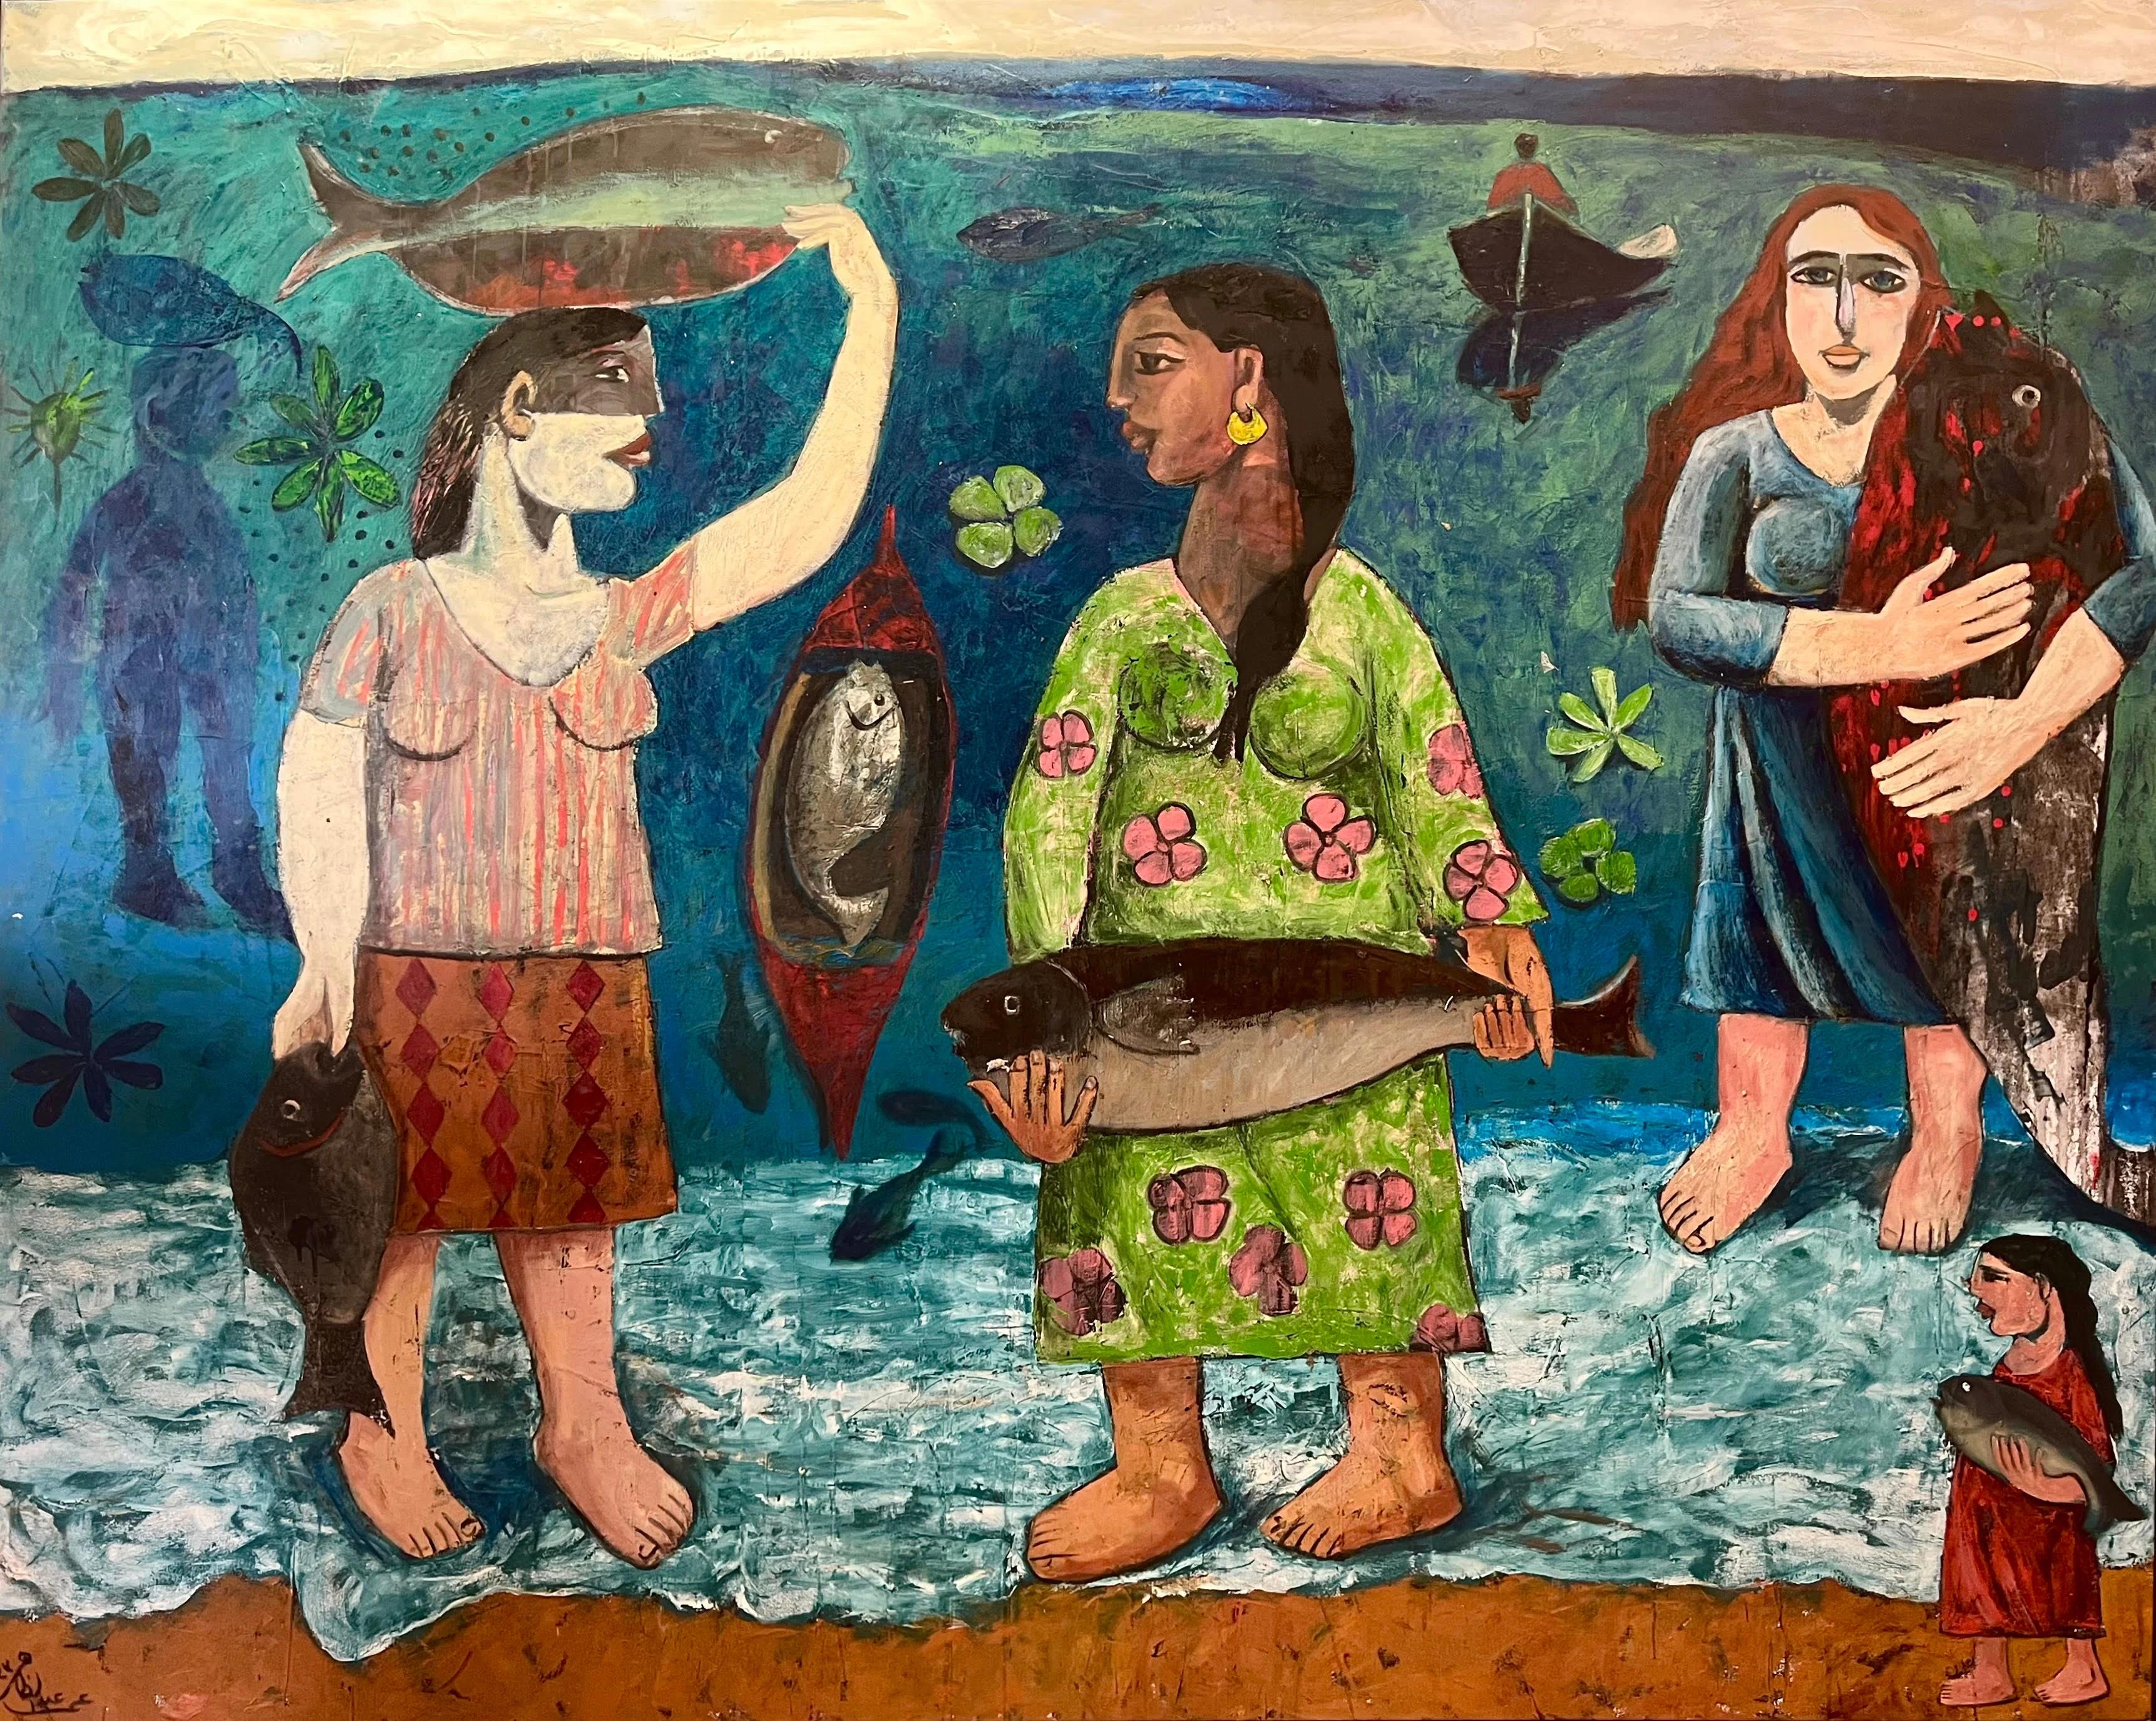 "Maritime Maternal" Oil painting 68" x 86" inch by Omar Abdel Zaher